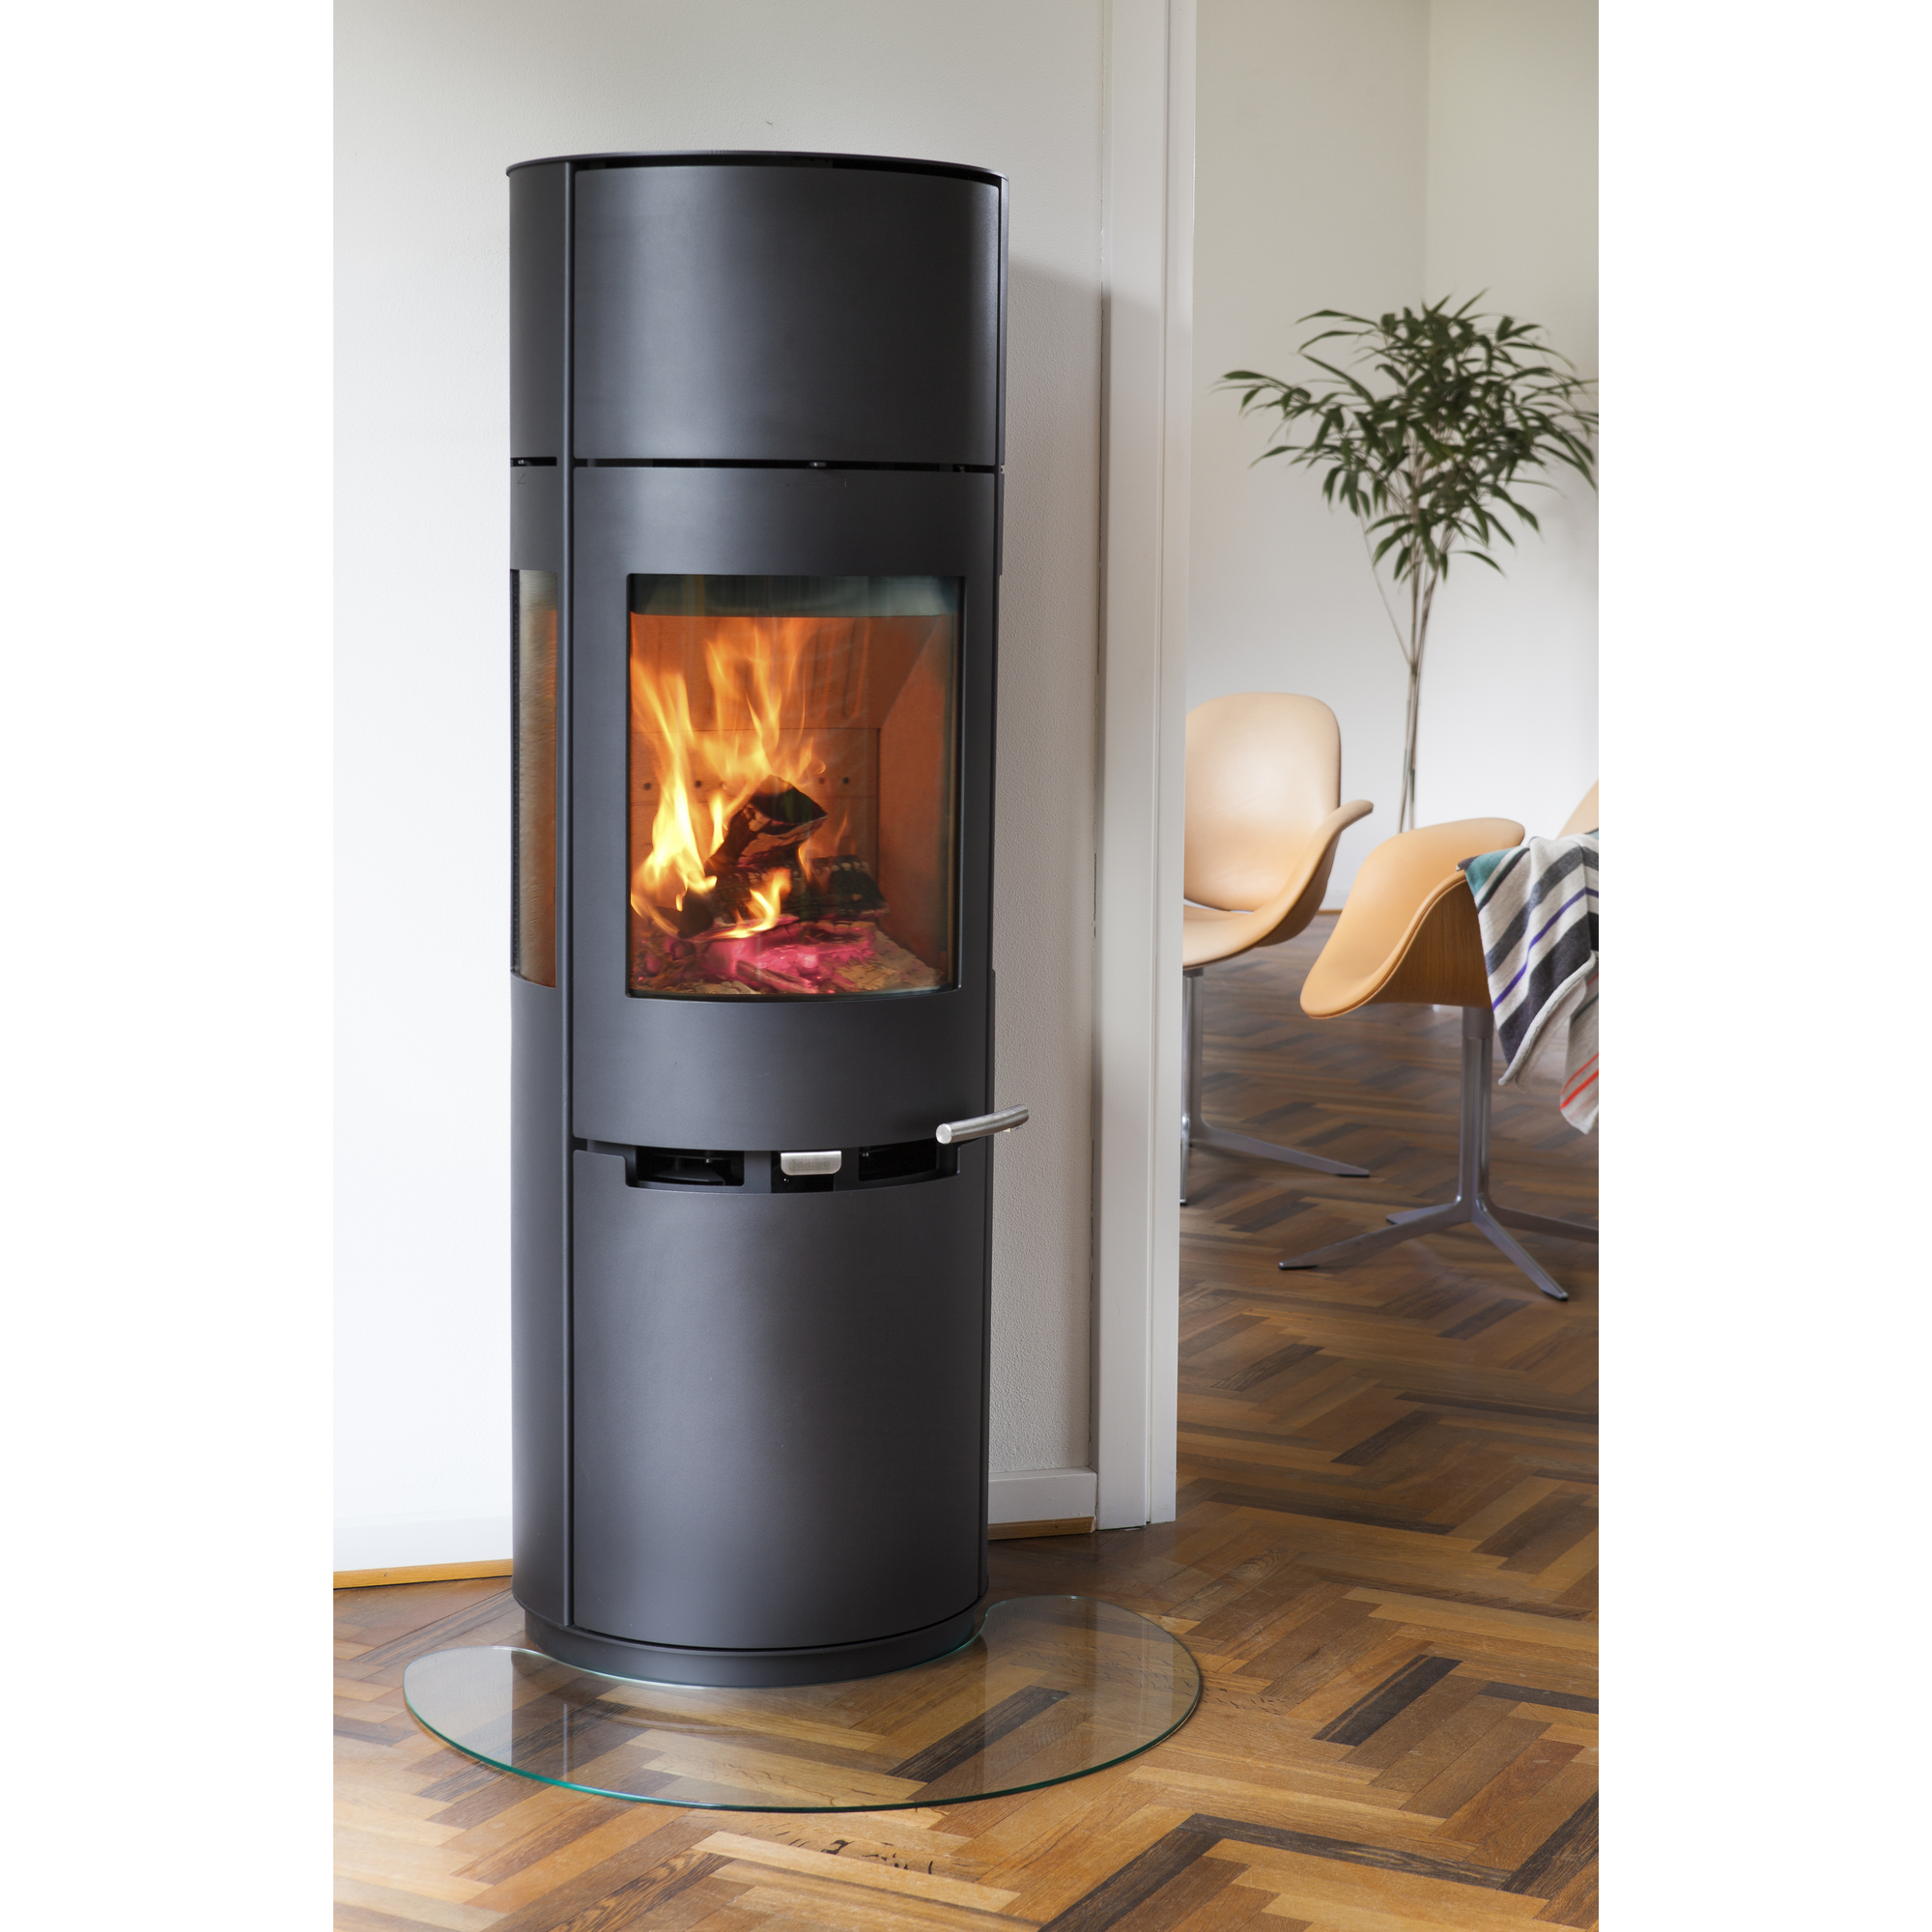 Kaminofen '9.7' Stahl 6 kW + product picture